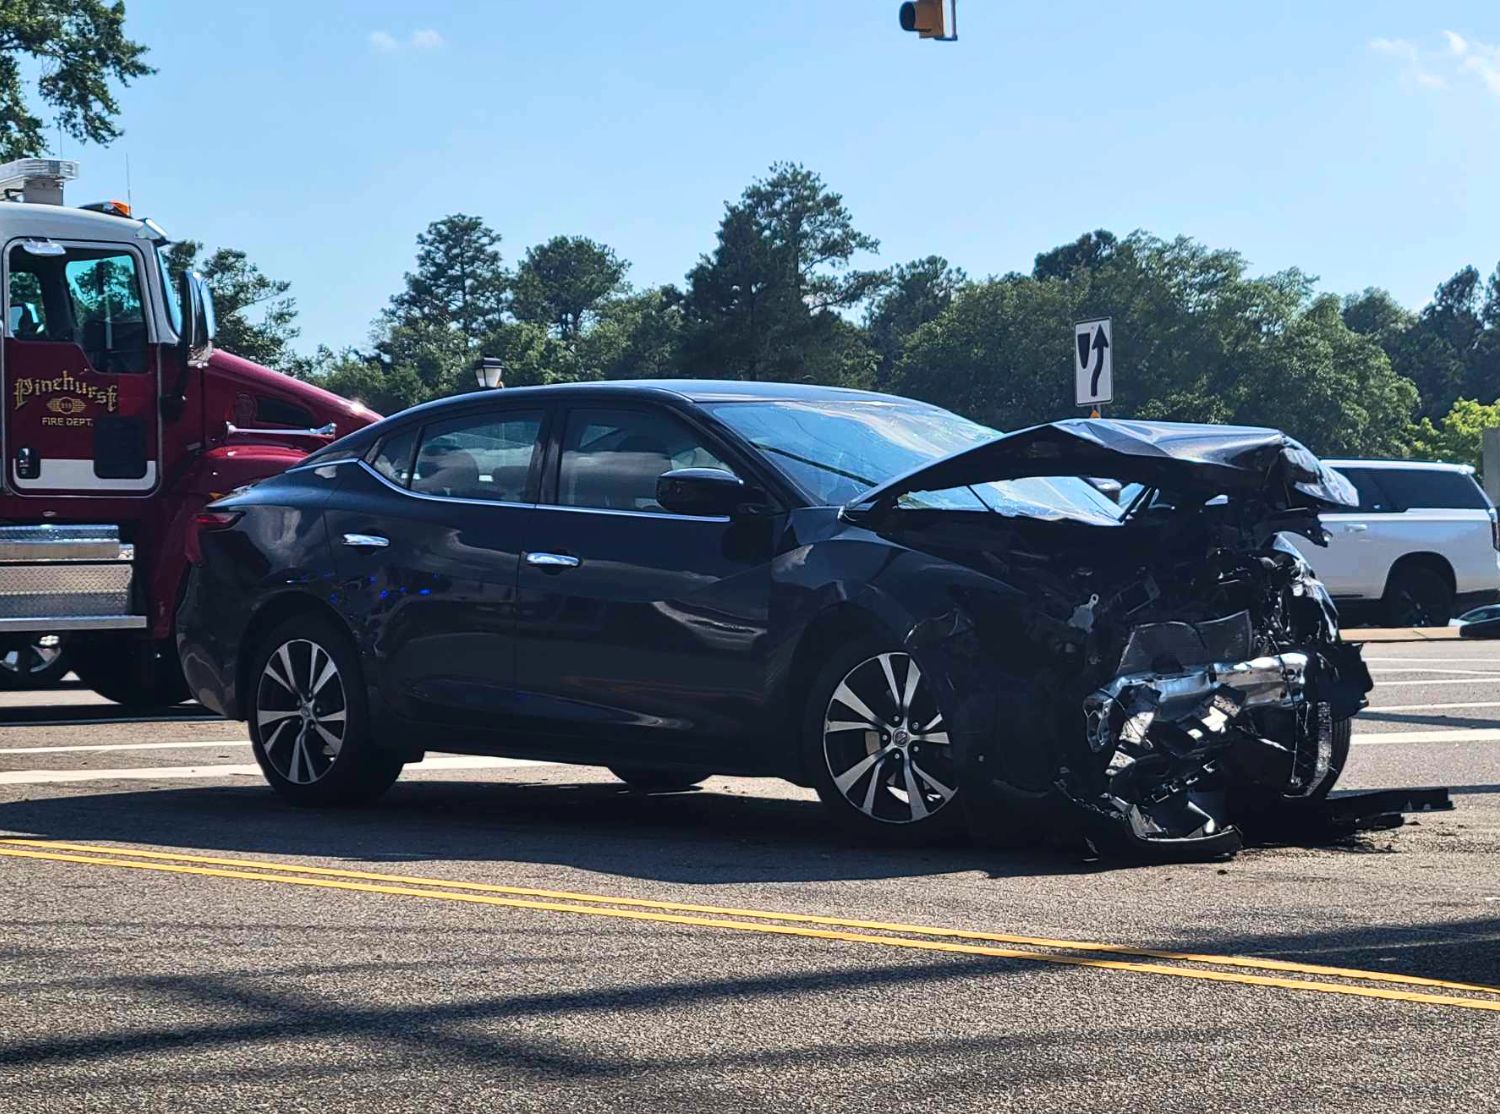 Driver airlifted after Pinehurst collision – Sandhill Sentinel